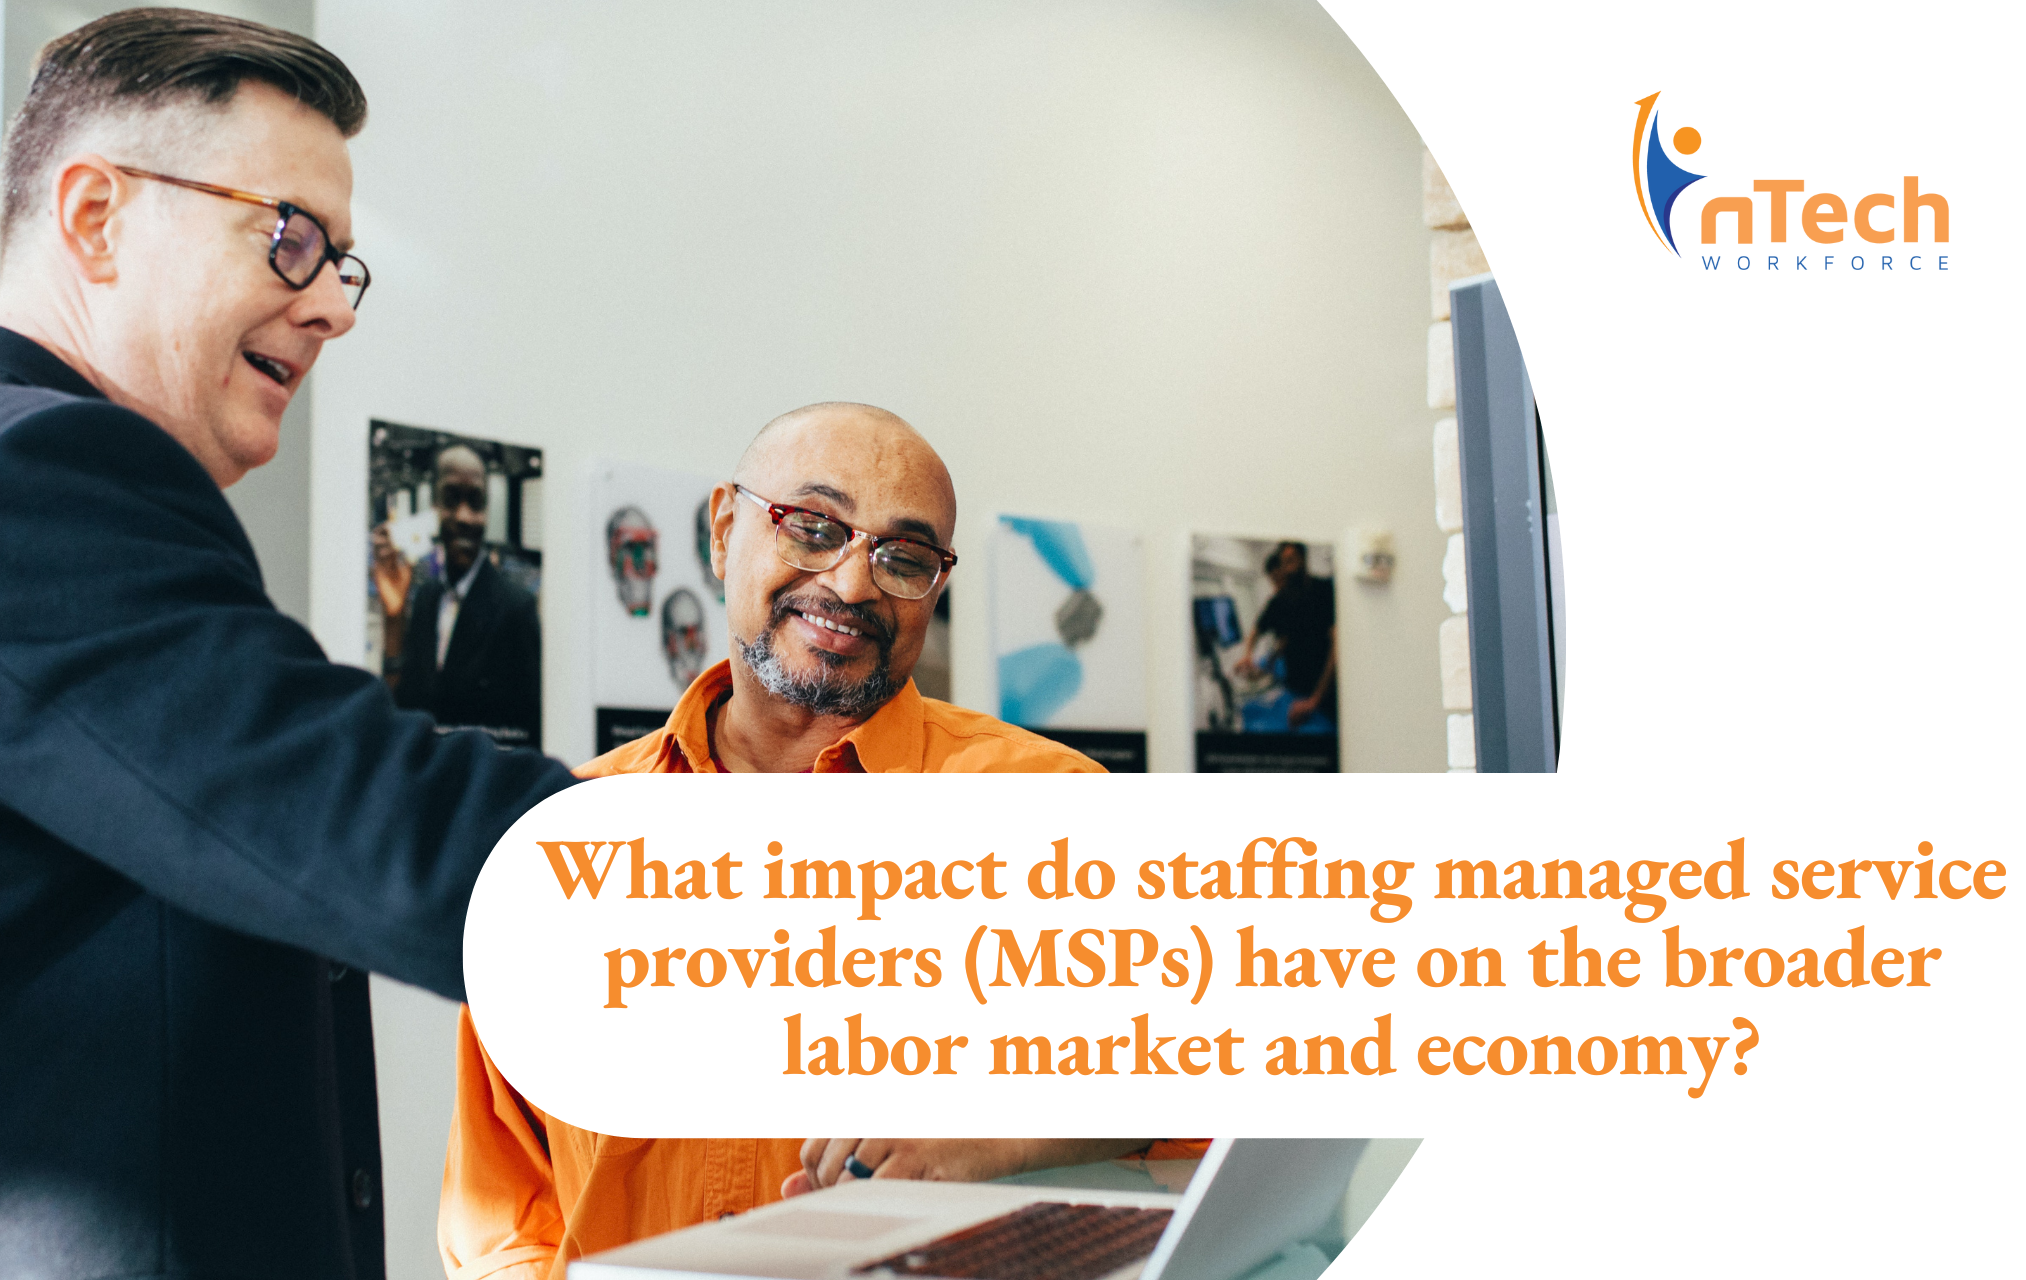 What impact do staffing managed service providers (MSPs) have on the broader labor market and economy?